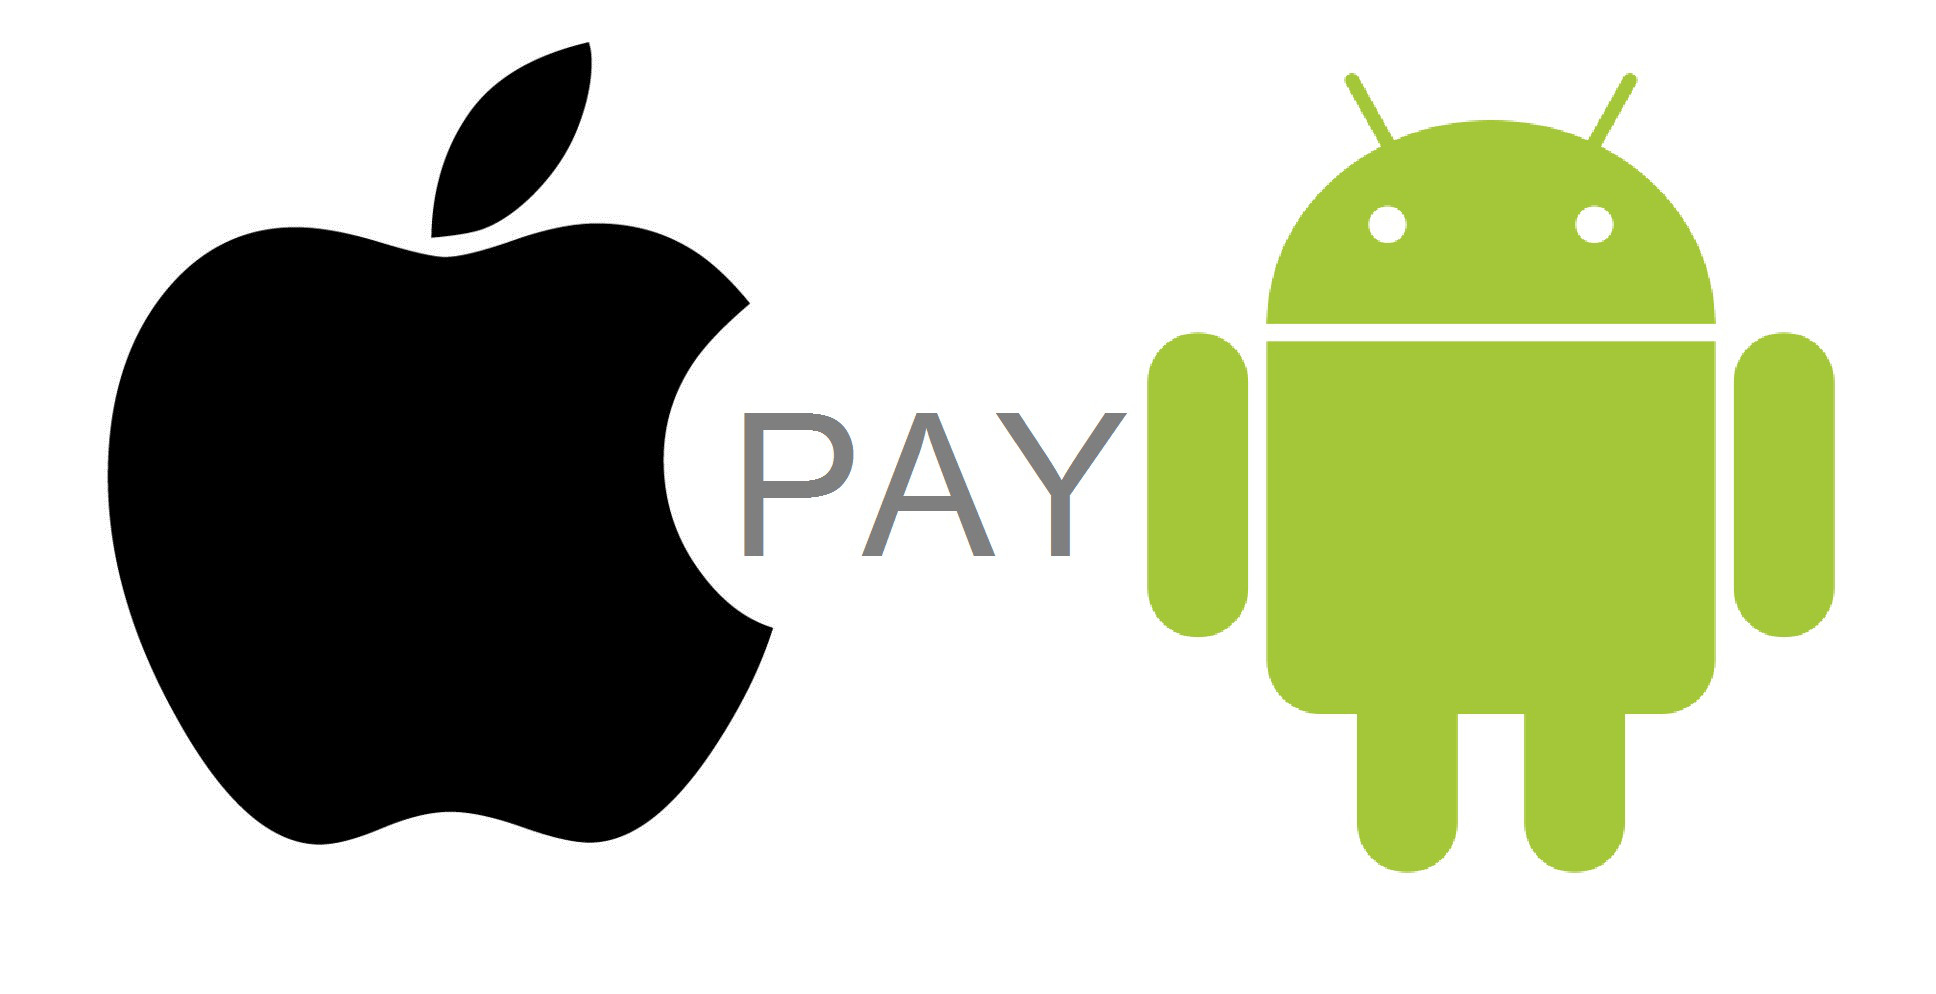 Apple-pay-and-Android-pay-will-face-the-heat-of-upcoming-LG-White-Card